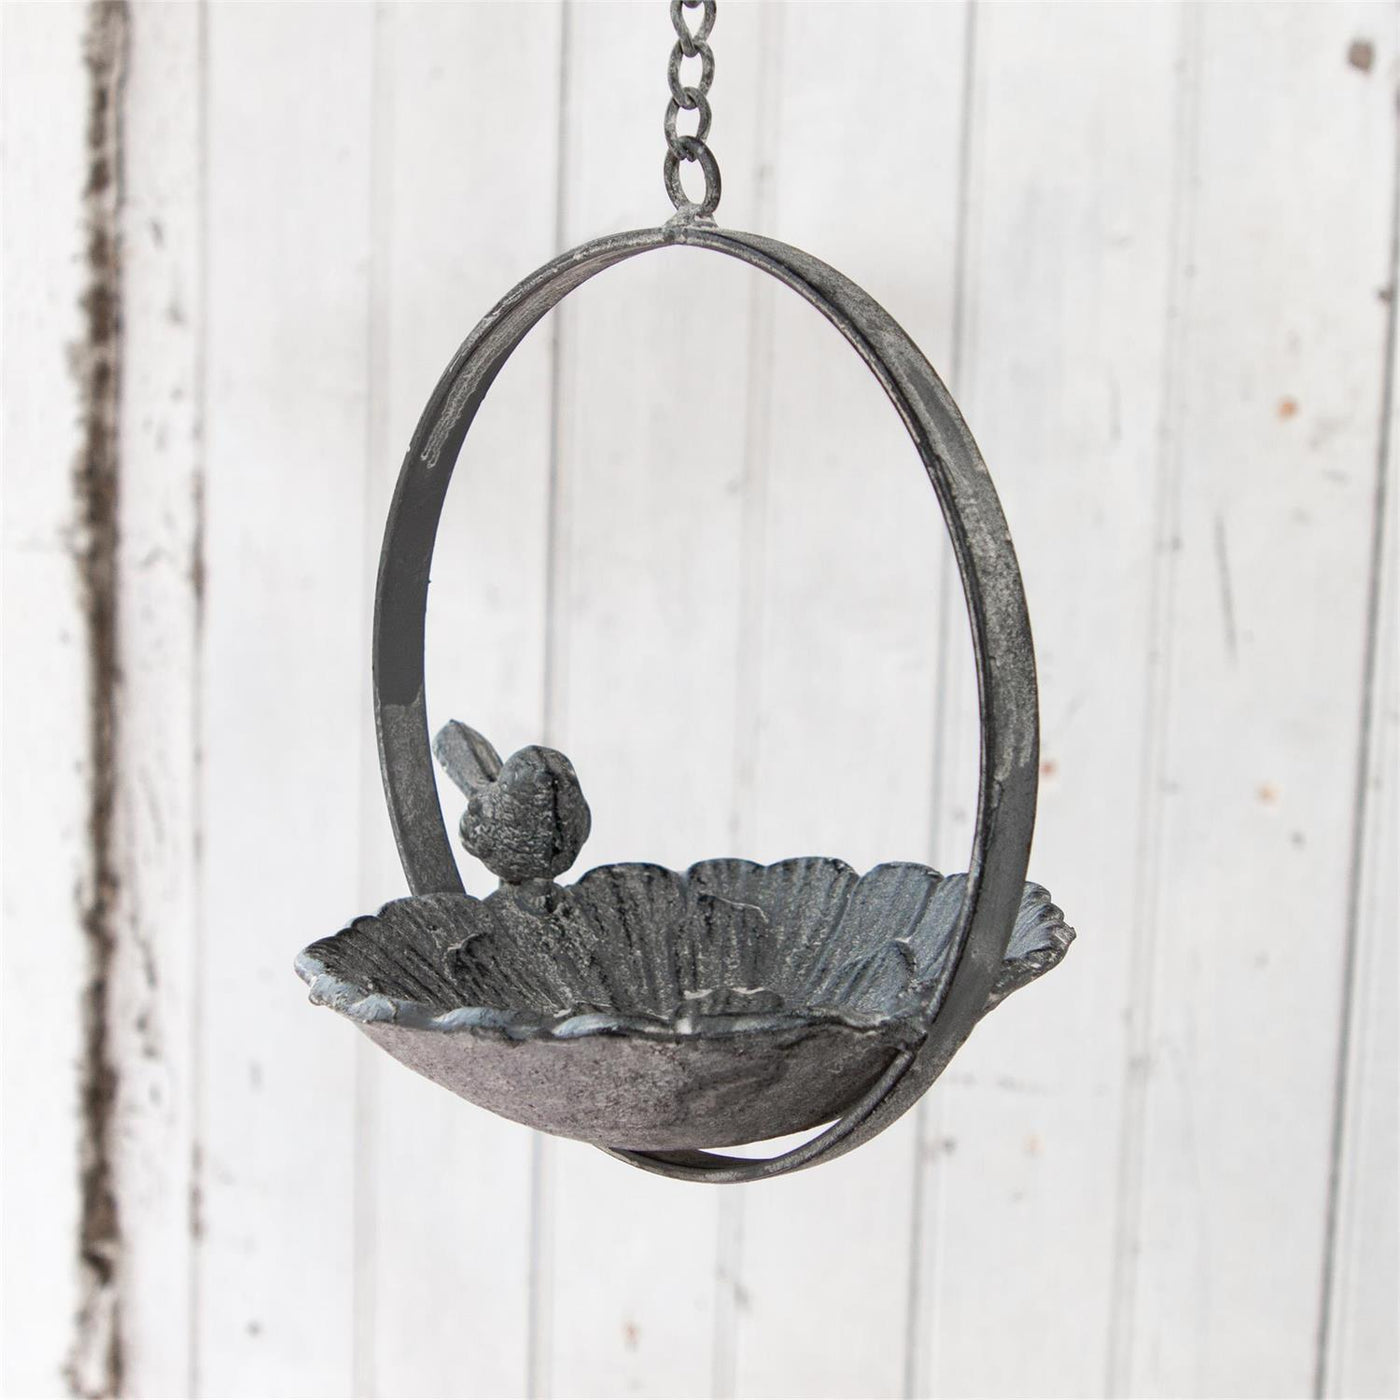 Rustic Two-Tiered Hanging Bird Feeder